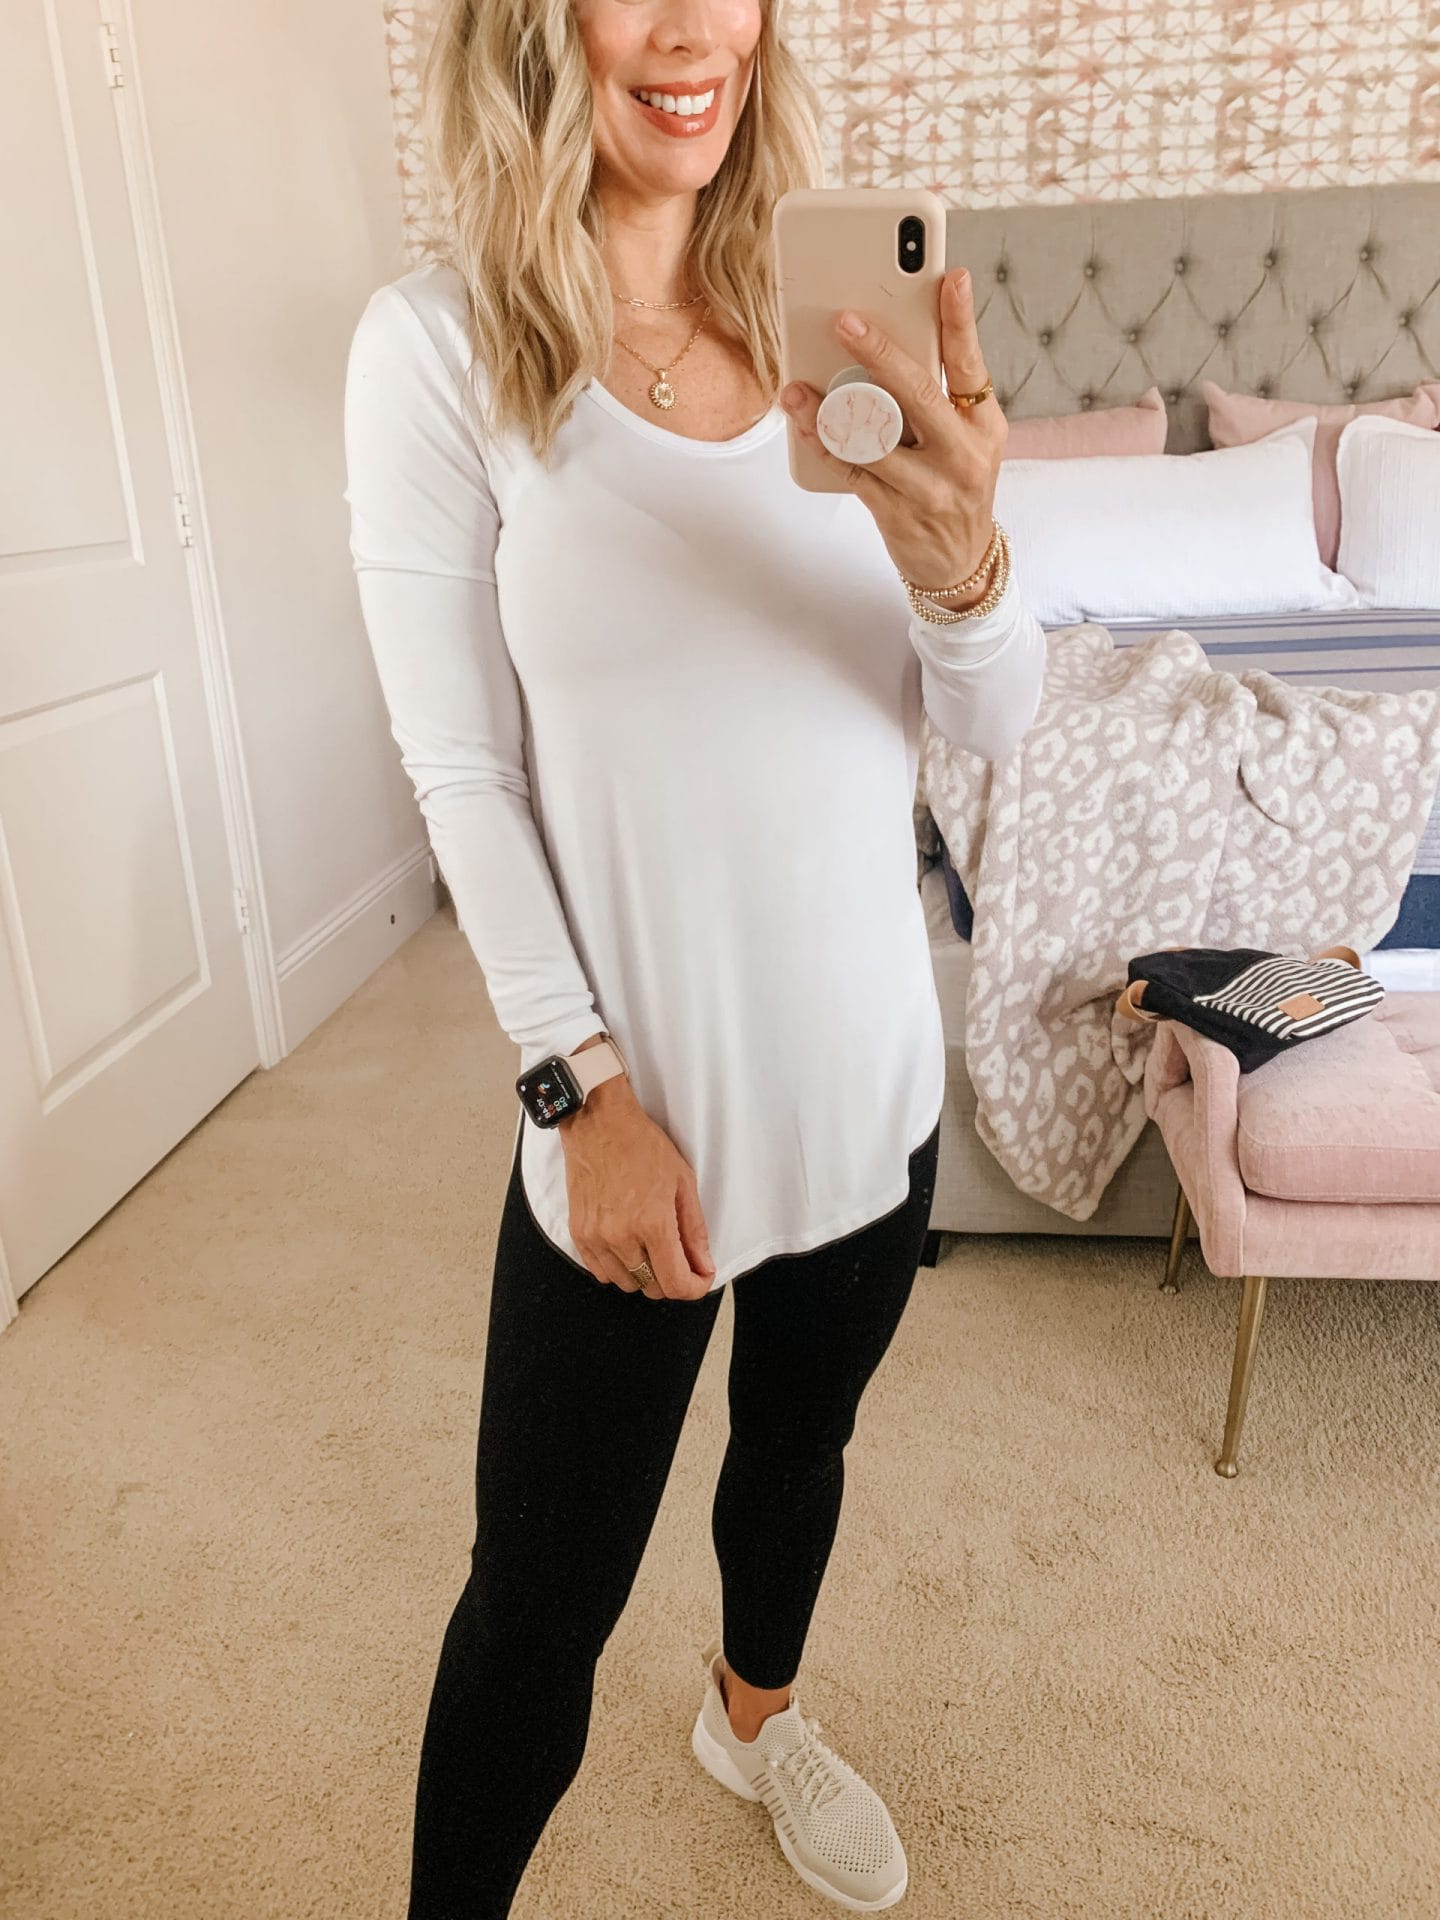 Amazon Fashion, Tunic Tee and Leggings with Slip on Sneakers 